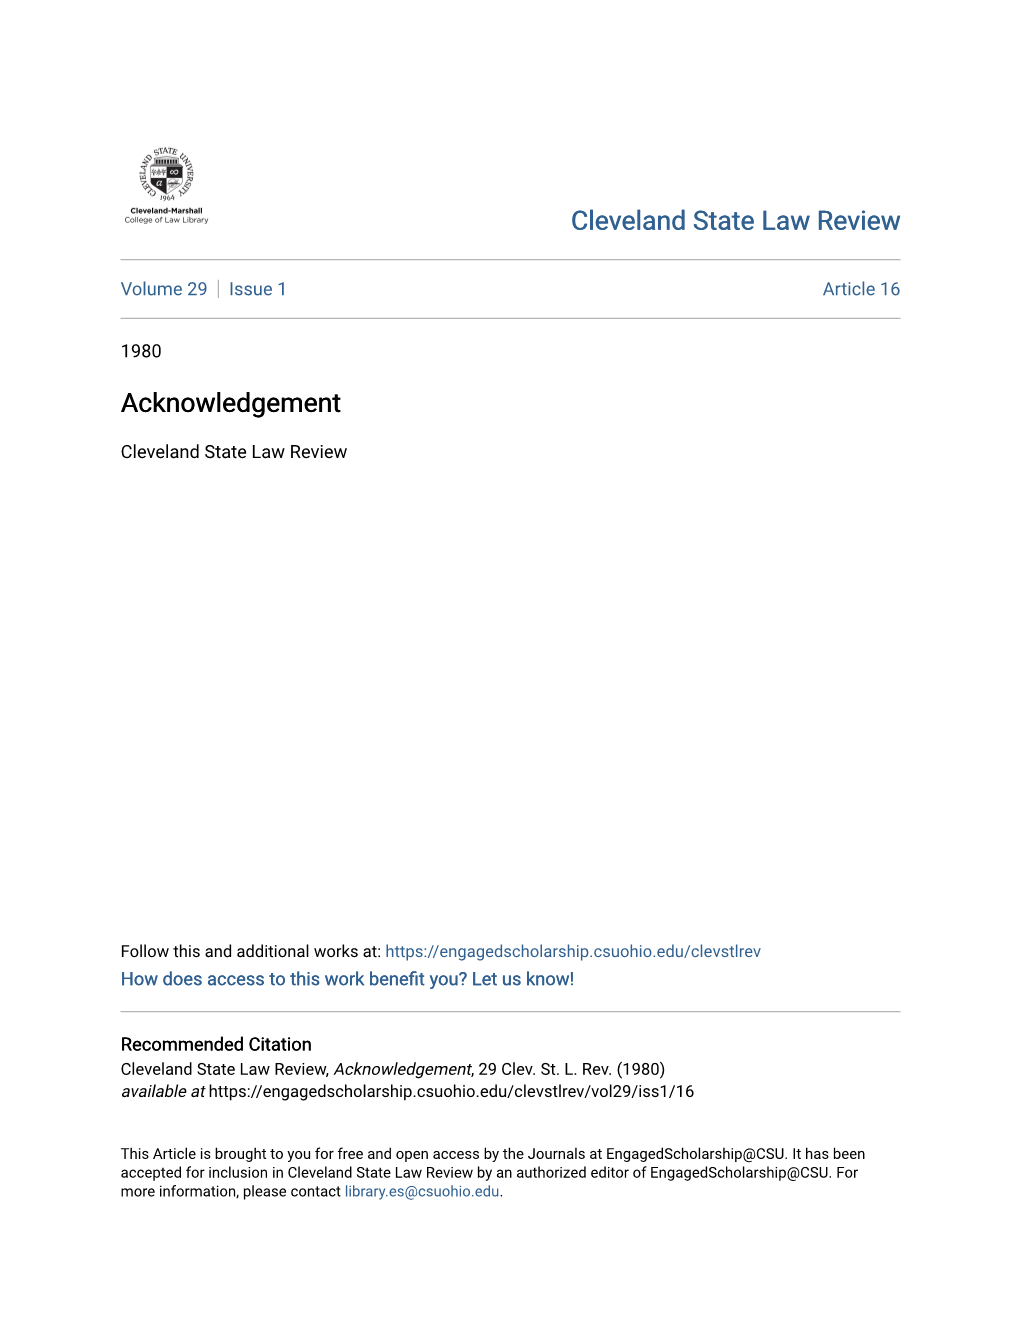 Cleveland State Law Review Acknowledgement